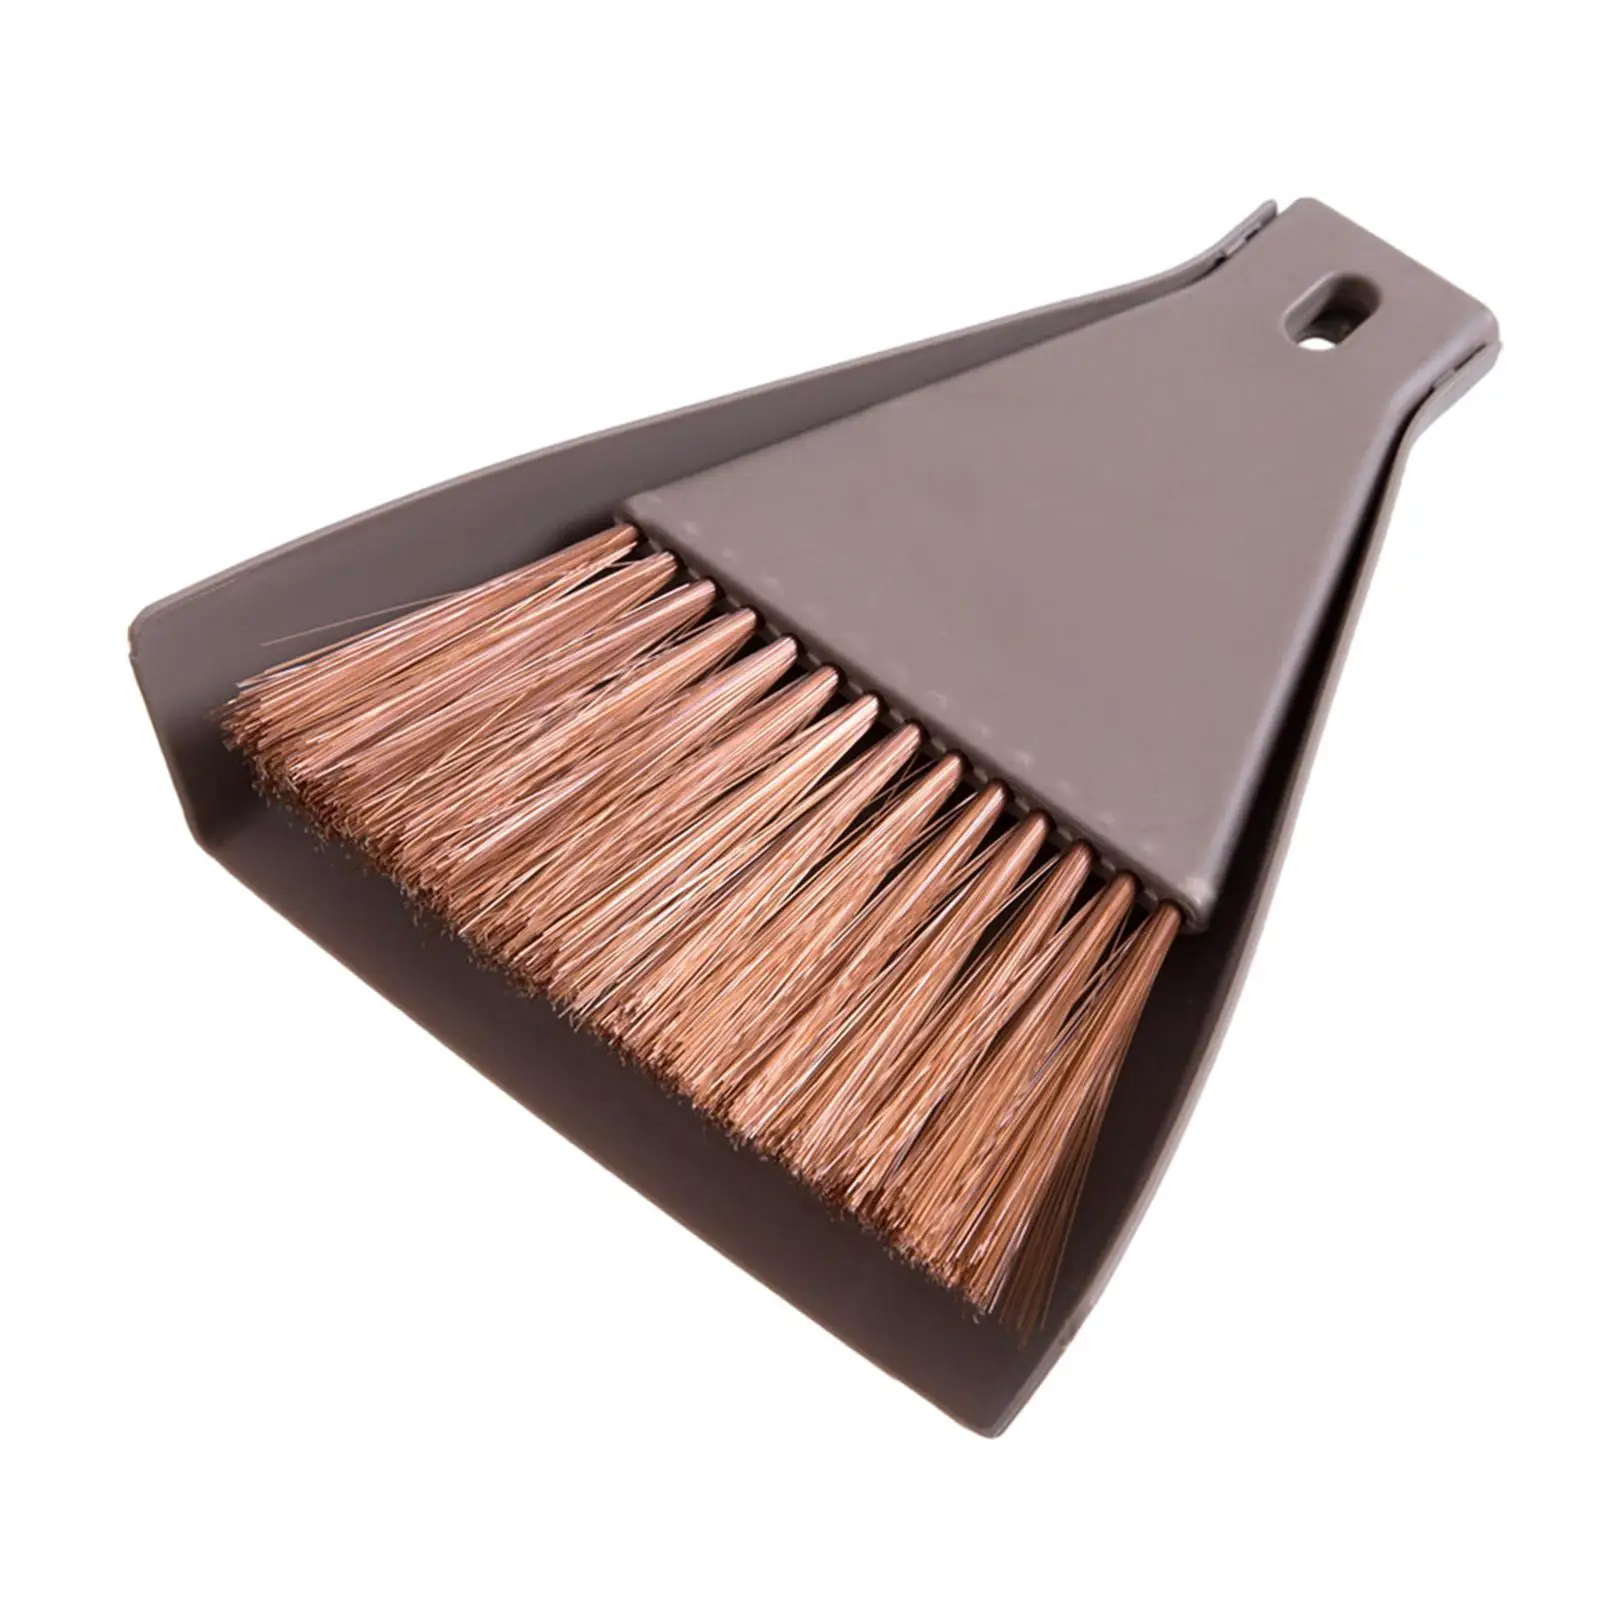 Mini Broom and Dustpan Cleaning Tools Sweeping Set Keyboard Sweep Broom Cleaning Brush for Keyboard Computer Home Office Desktop